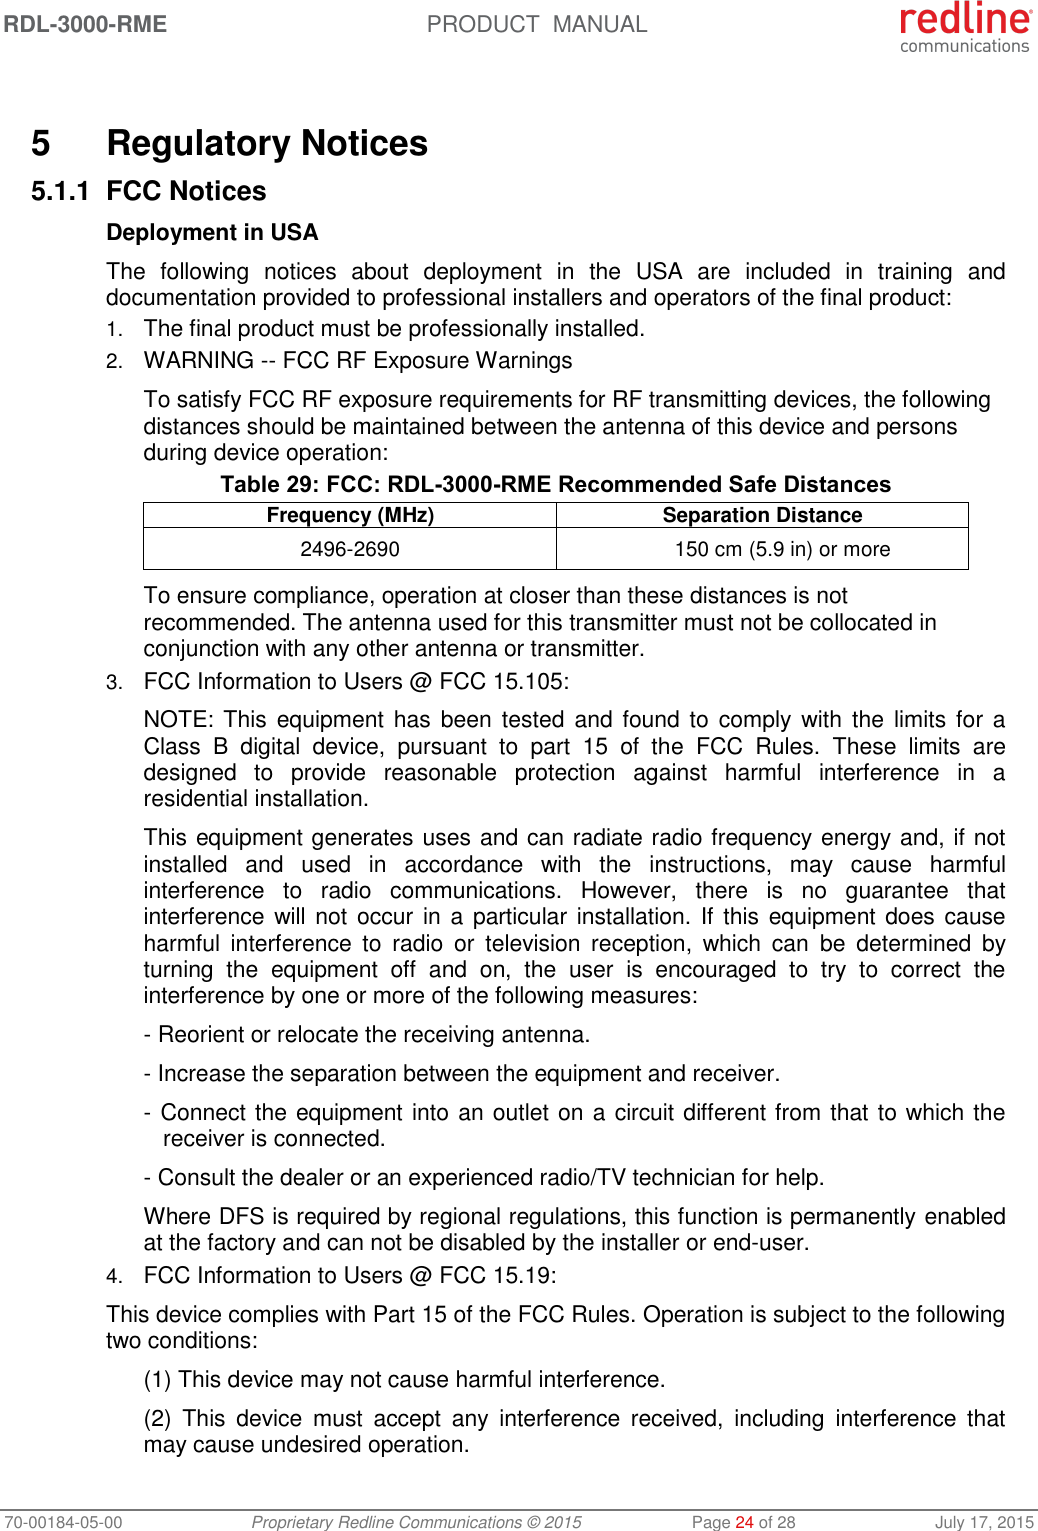 RDL-3000-RME  PRODUCT  MANUAL 70-00184-05-00 Proprietary Redline Communications © 2015  Page 24 of 28  July 17, 2015   5  Regulatory Notices 5.1.1 FCC Notices Deployment in USA The  following  notices  about  deployment  in  the  USA  are  included  in  training  and documentation provided to professional installers and operators of the final product: 1. The final product must be professionally installed. 2. WARNING -- FCC RF Exposure Warnings To satisfy FCC RF exposure requirements for RF transmitting devices, the following distances should be maintained between the antenna of this device and persons during device operation: Table 29: FCC: RDL-3000-RME Recommended Safe Distances Frequency (MHz) Separation Distance 2496-2690 150 cm (5.9 in) or more To ensure compliance, operation at closer than these distances is not recommended. The antenna used for this transmitter must not be collocated in conjunction with any other antenna or transmitter. 3. FCC Information to Users @ FCC 15.105: NOTE: This  equipment has been tested  and found to  comply with the  limits for  a Class  B  digital  device,  pursuant  to  part  15  of  the  FCC  Rules.  These  limits  are designed  to  provide  reasonable  protection  against  harmful  interference  in  a residential installation. This equipment generates uses and can radiate radio frequency energy and, if not installed  and  used  in  accordance  with  the  instructions,  may  cause  harmful interference  to  radio  communications.  However,  there  is  no  guarantee  that interference will not  occur in a particular installation. If this  equipment does cause harmful  interference  to  radio  or  television  reception,  which  can  be  determined  by turning  the  equipment  off  and  on,  the  user  is  encouraged  to  try  to  correct  the interference by one or more of the following measures: - Reorient or relocate the receiving antenna. - Increase the separation between the equipment and receiver. - Connect the equipment into an outlet on a circuit different from that to which the receiver is connected. - Consult the dealer or an experienced radio/TV technician for help. Where DFS is required by regional regulations, this function is permanently enabled at the factory and can not be disabled by the installer or end-user. 4. FCC Information to Users @ FCC 15.19: This device complies with Part 15 of the FCC Rules. Operation is subject to the following two conditions: (1) This device may not cause harmful interference. (2)  This  device  must  accept  any  interference  received,  including  interference  that may cause undesired operation. 